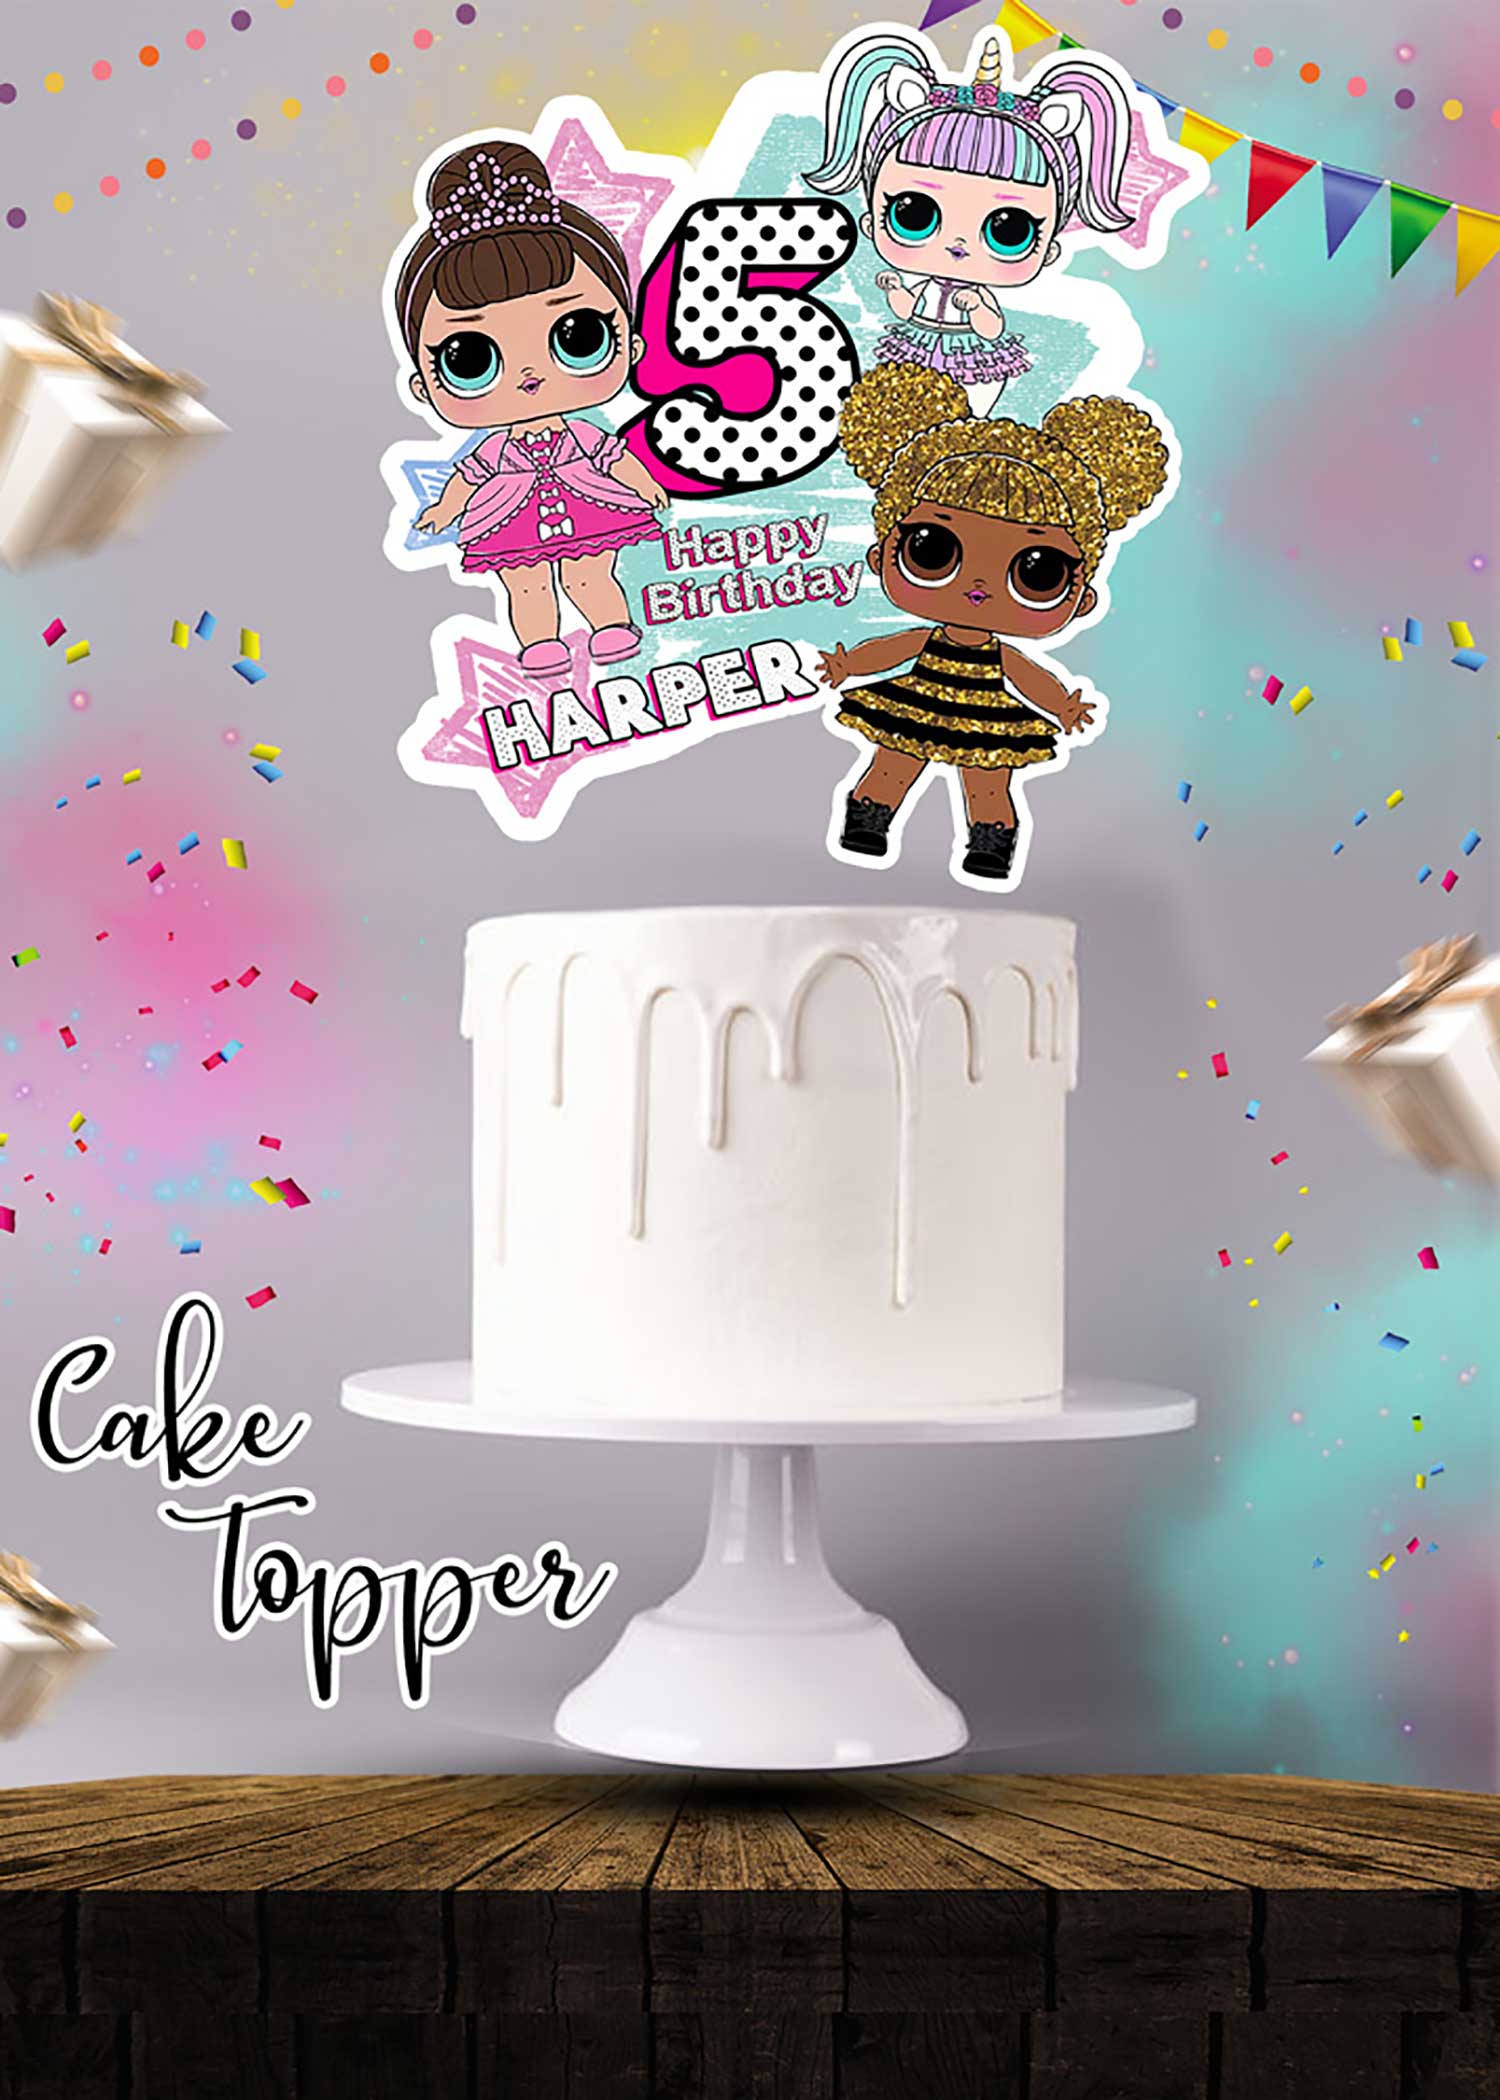 LOL Dolls | Sweet Tops - Personalised, Edible Cake Toppers and Gifts